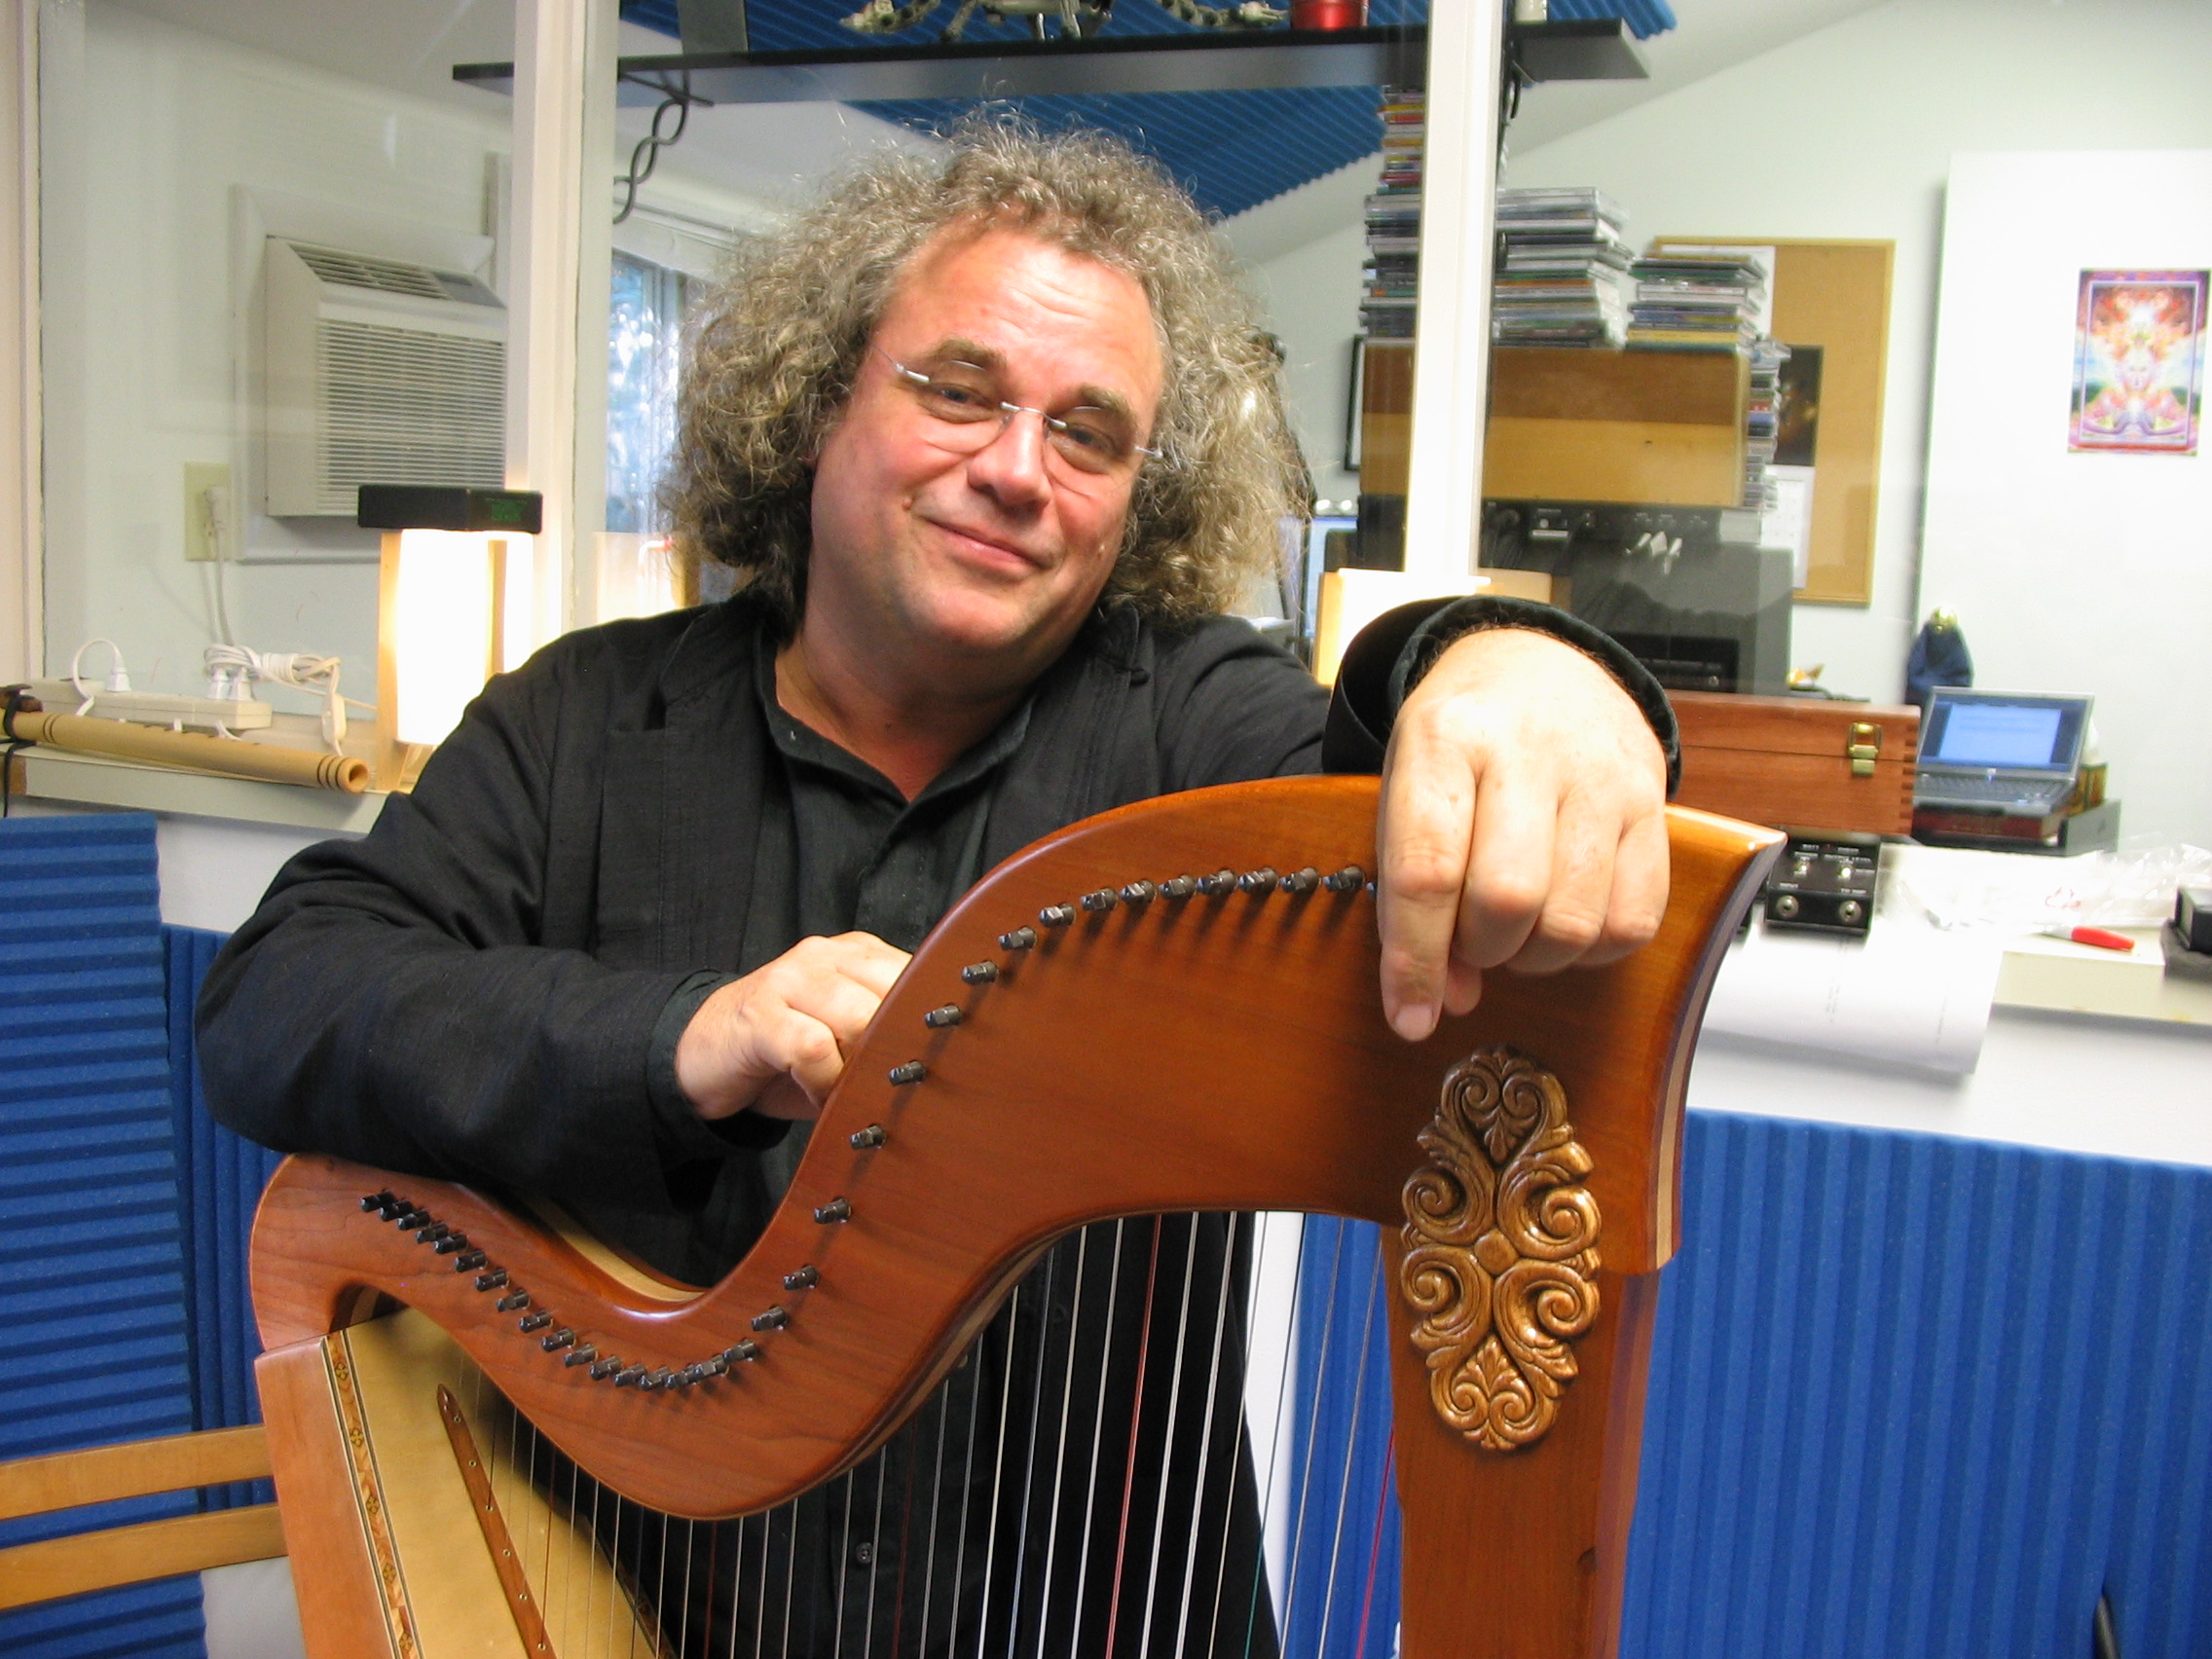 Andreas Vollenweider at Echoes